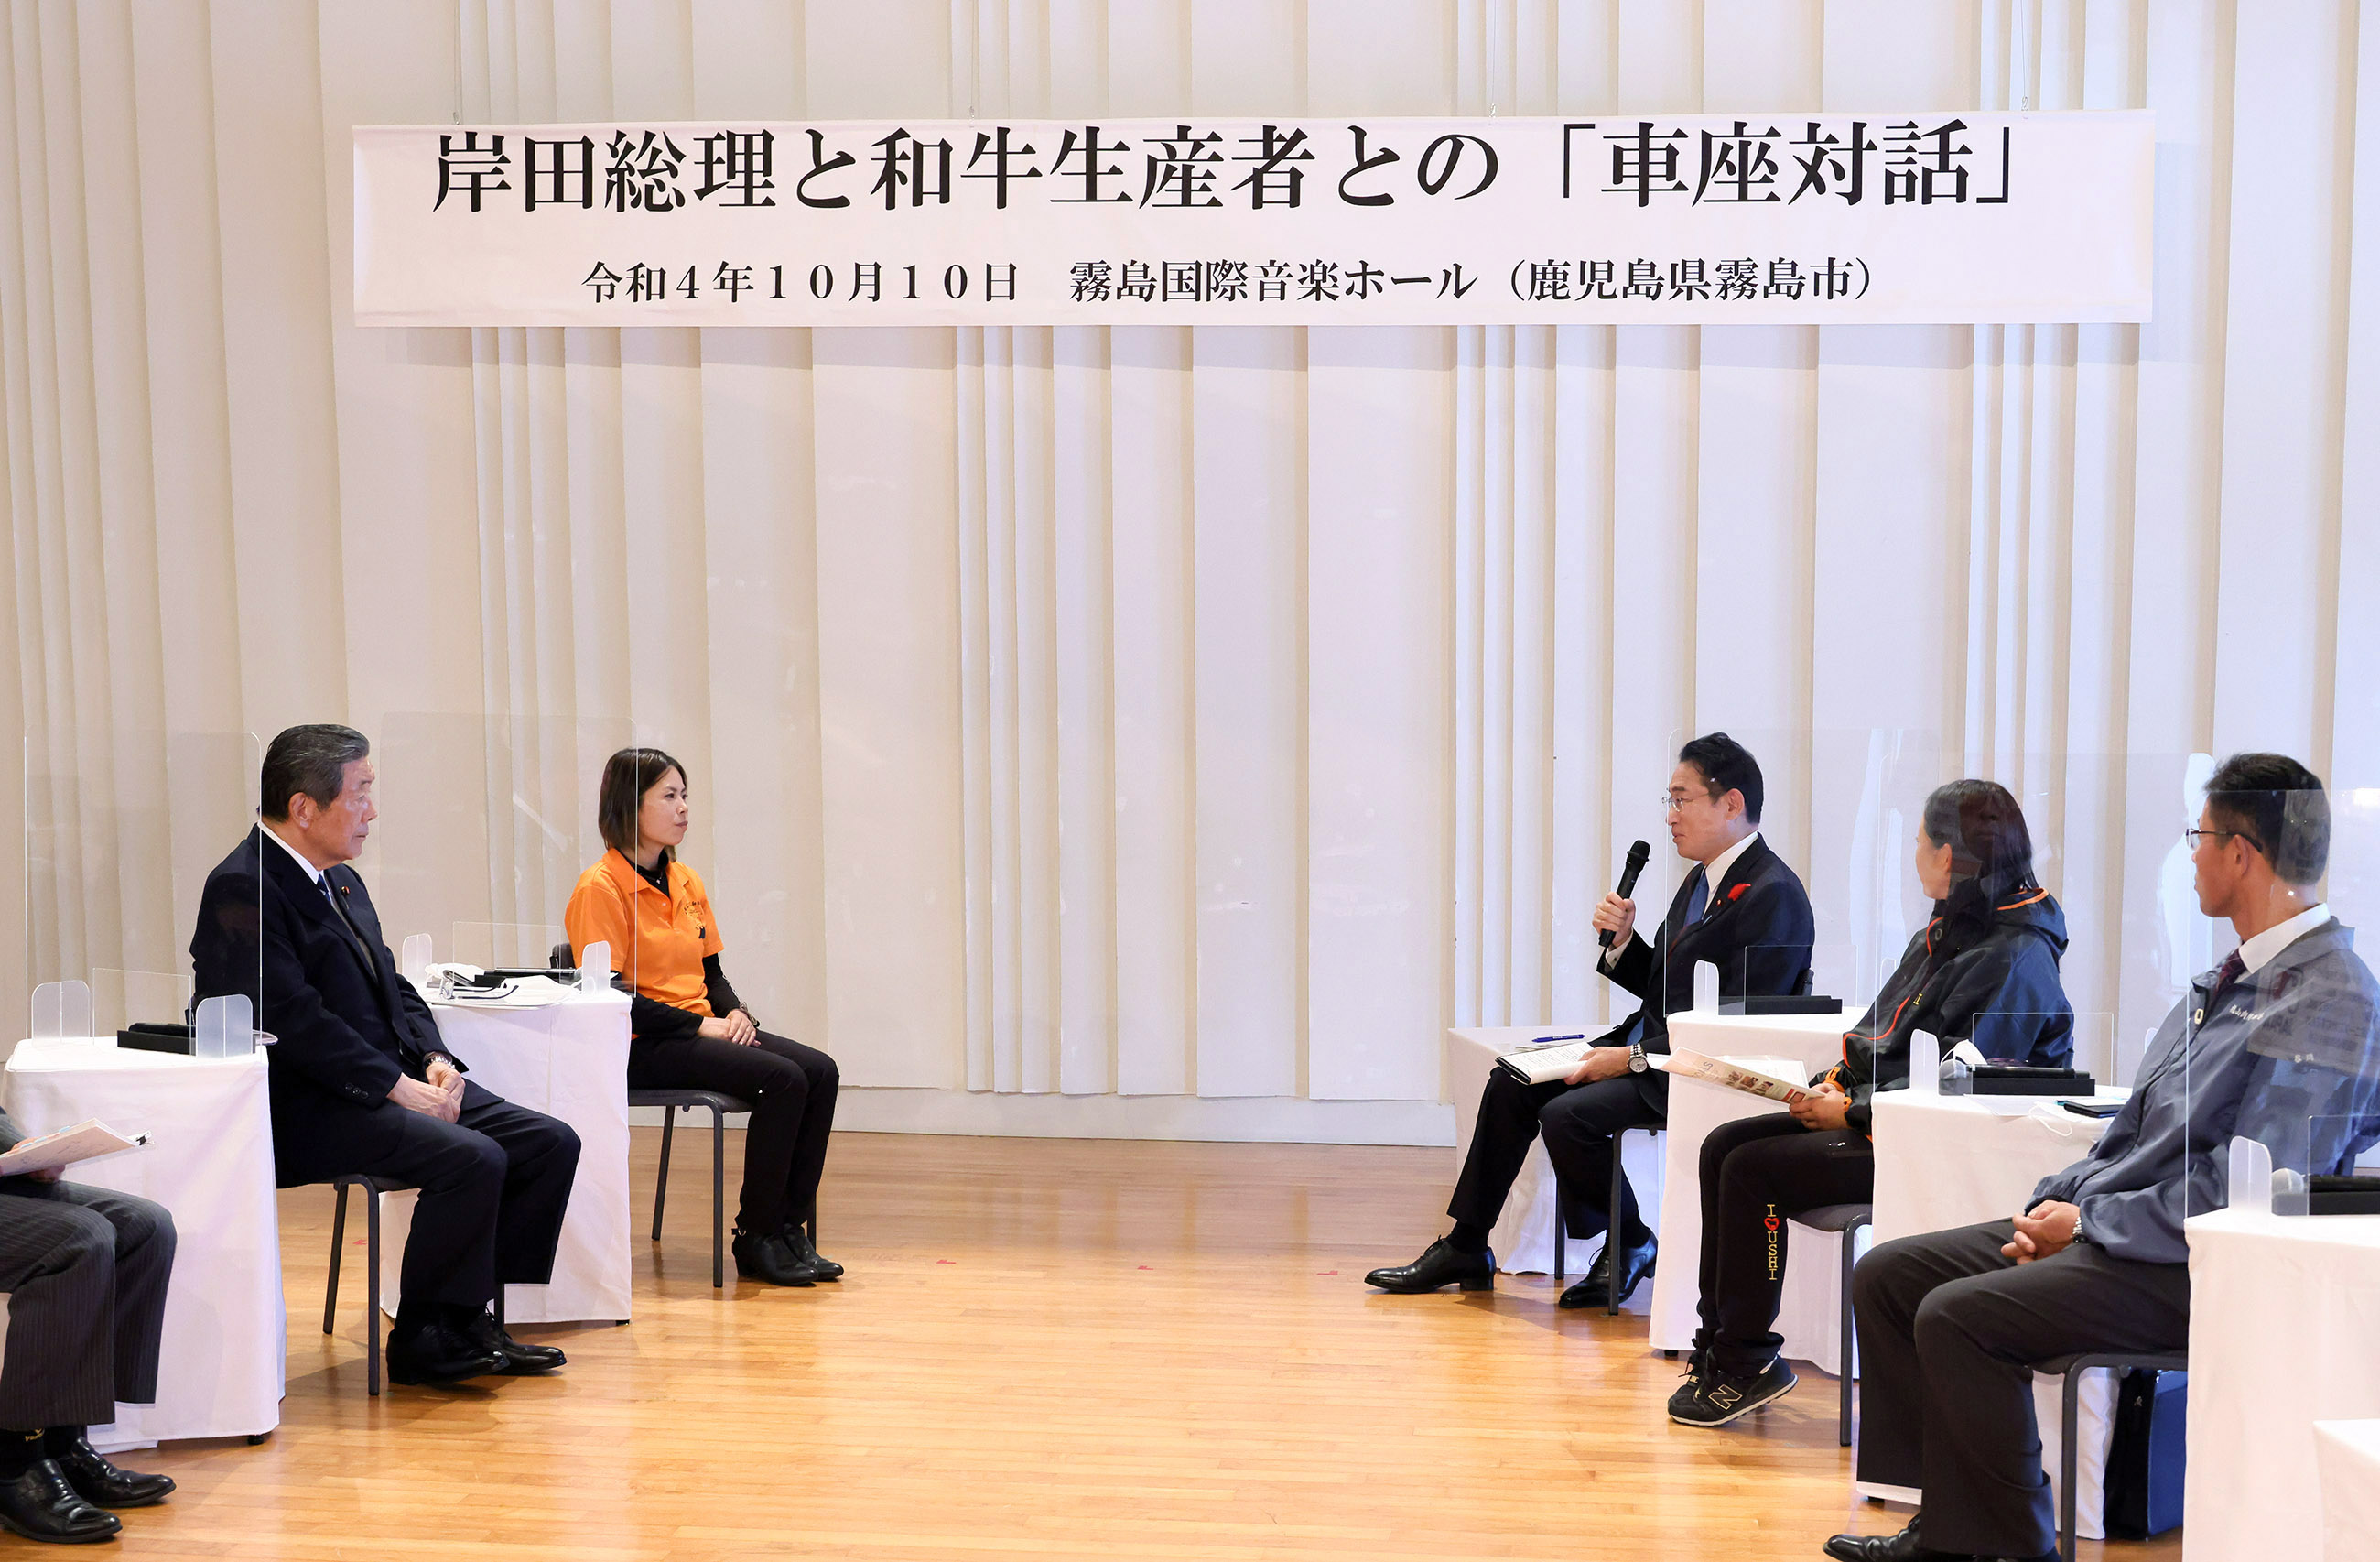 Photograph of the Prime Minister making a remark at a roundtable talk (6)